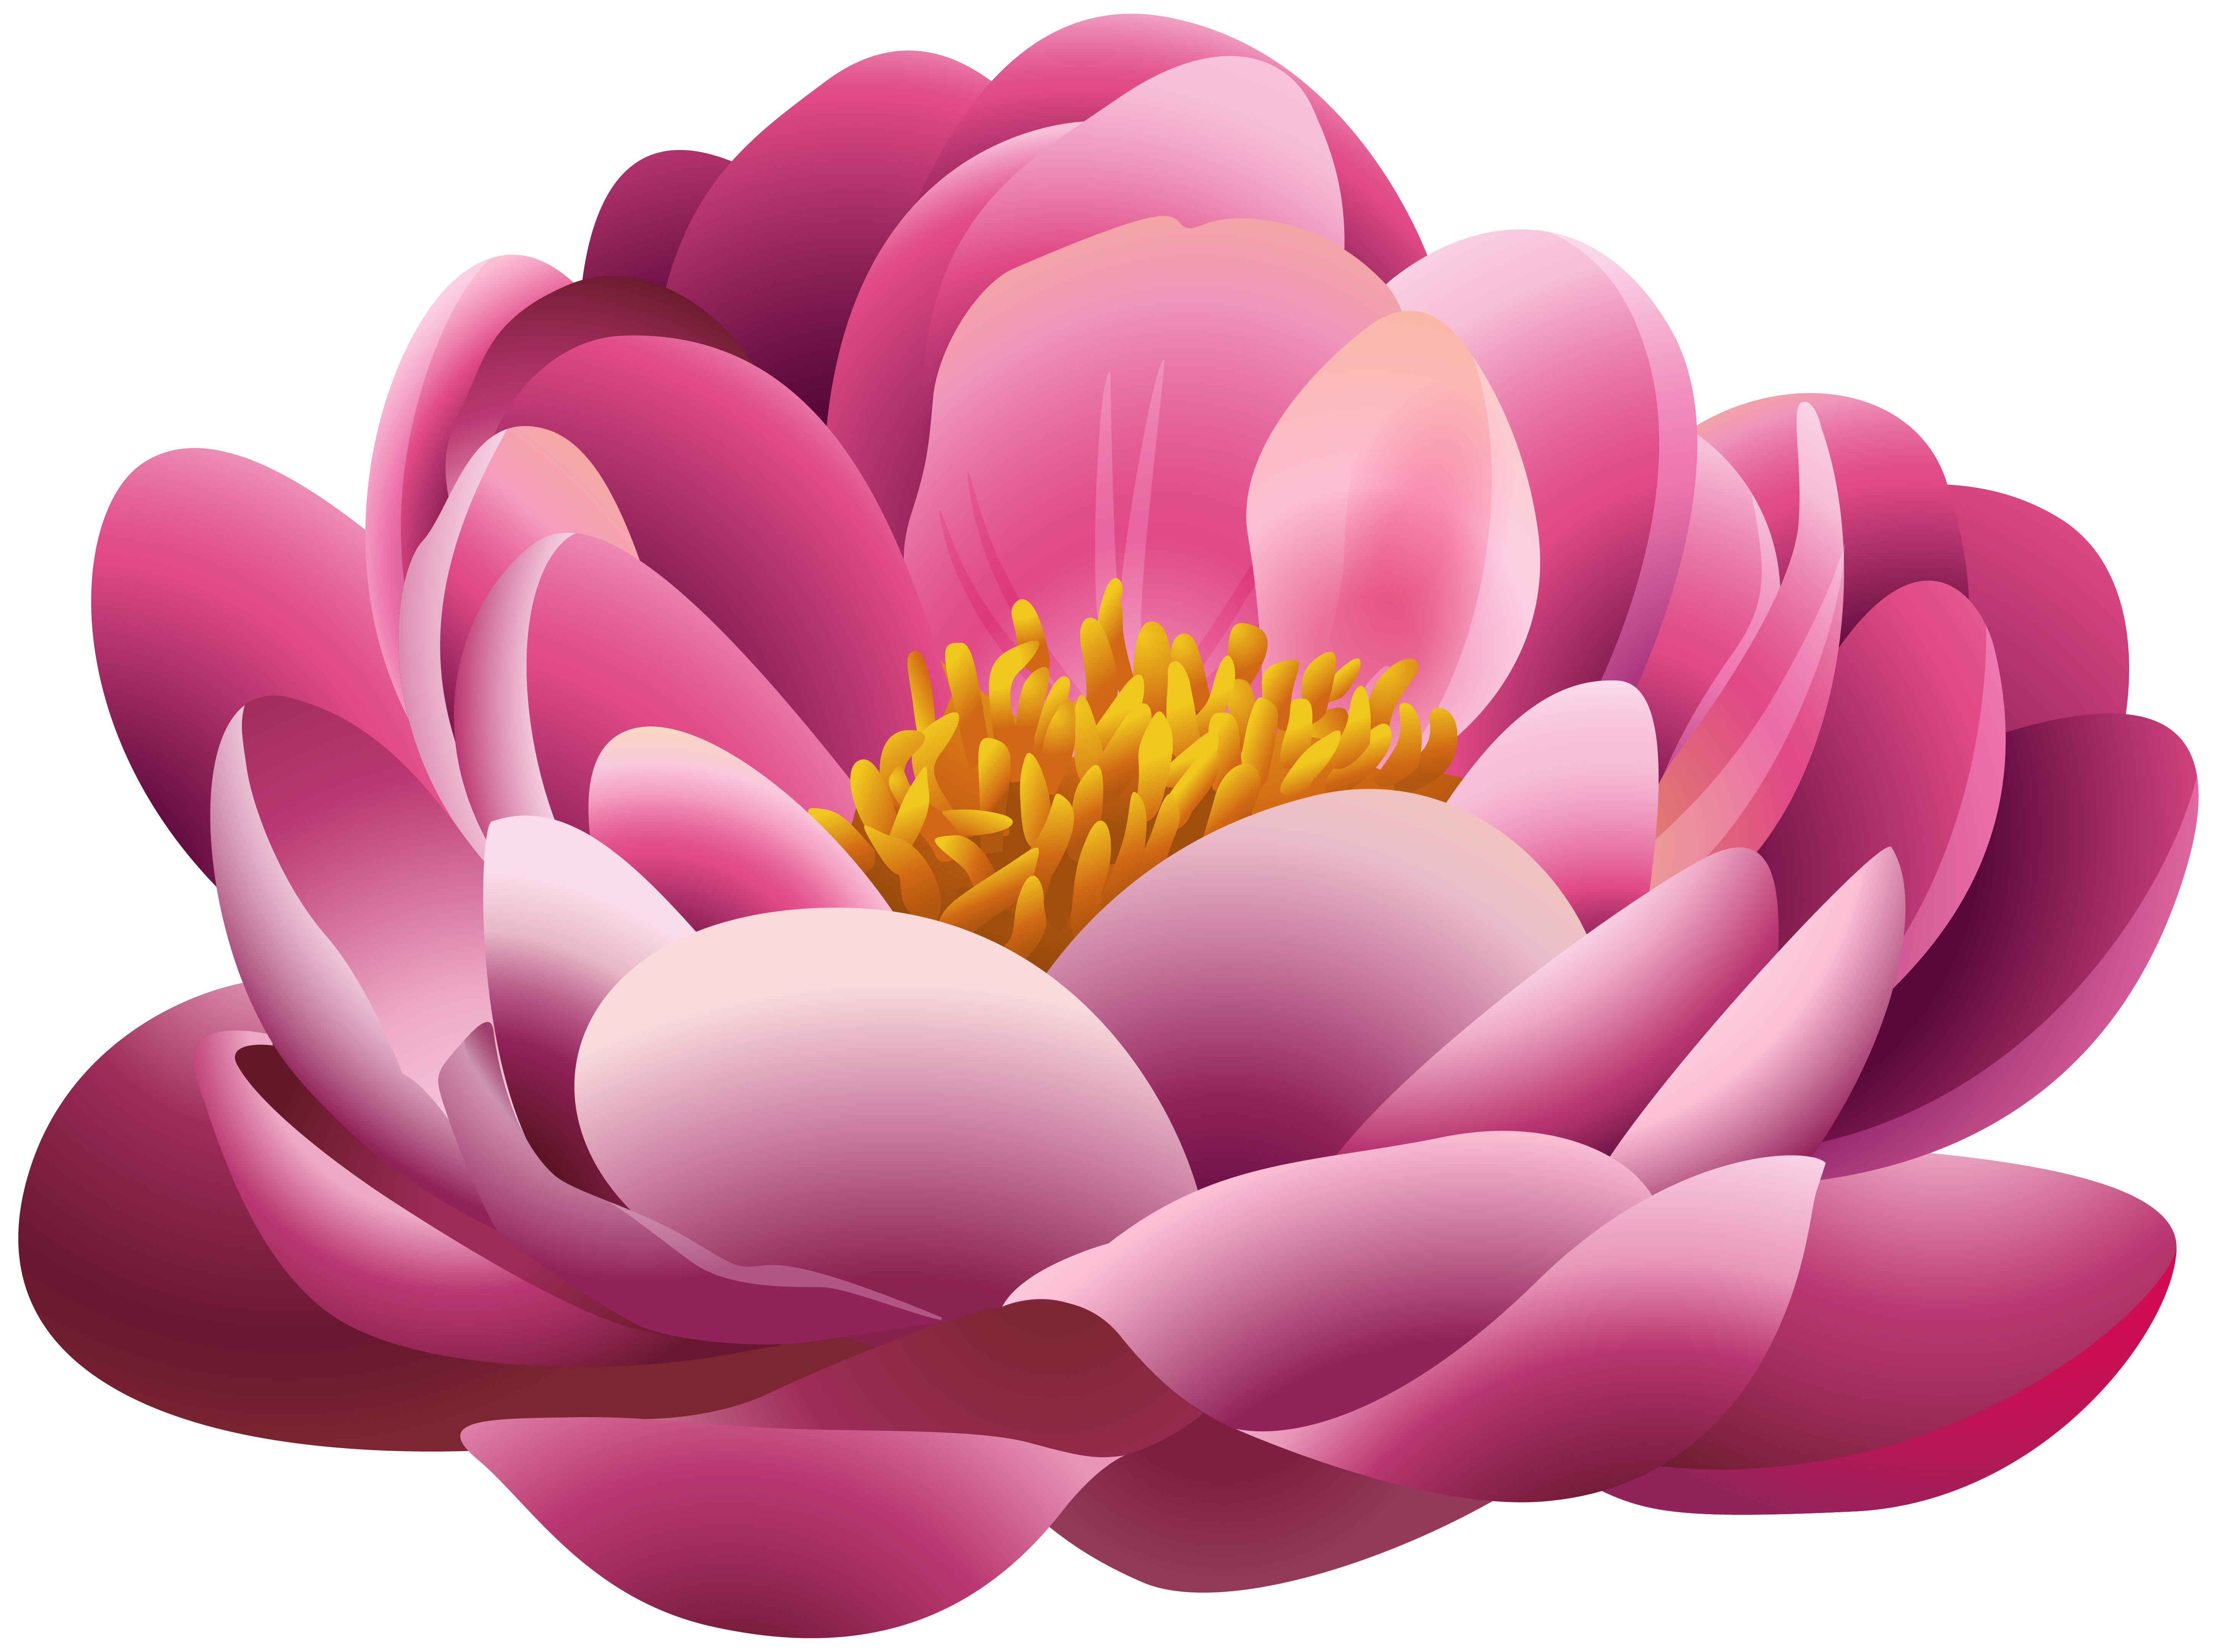 Beautiful Pink Flower PNG Clipart Image.